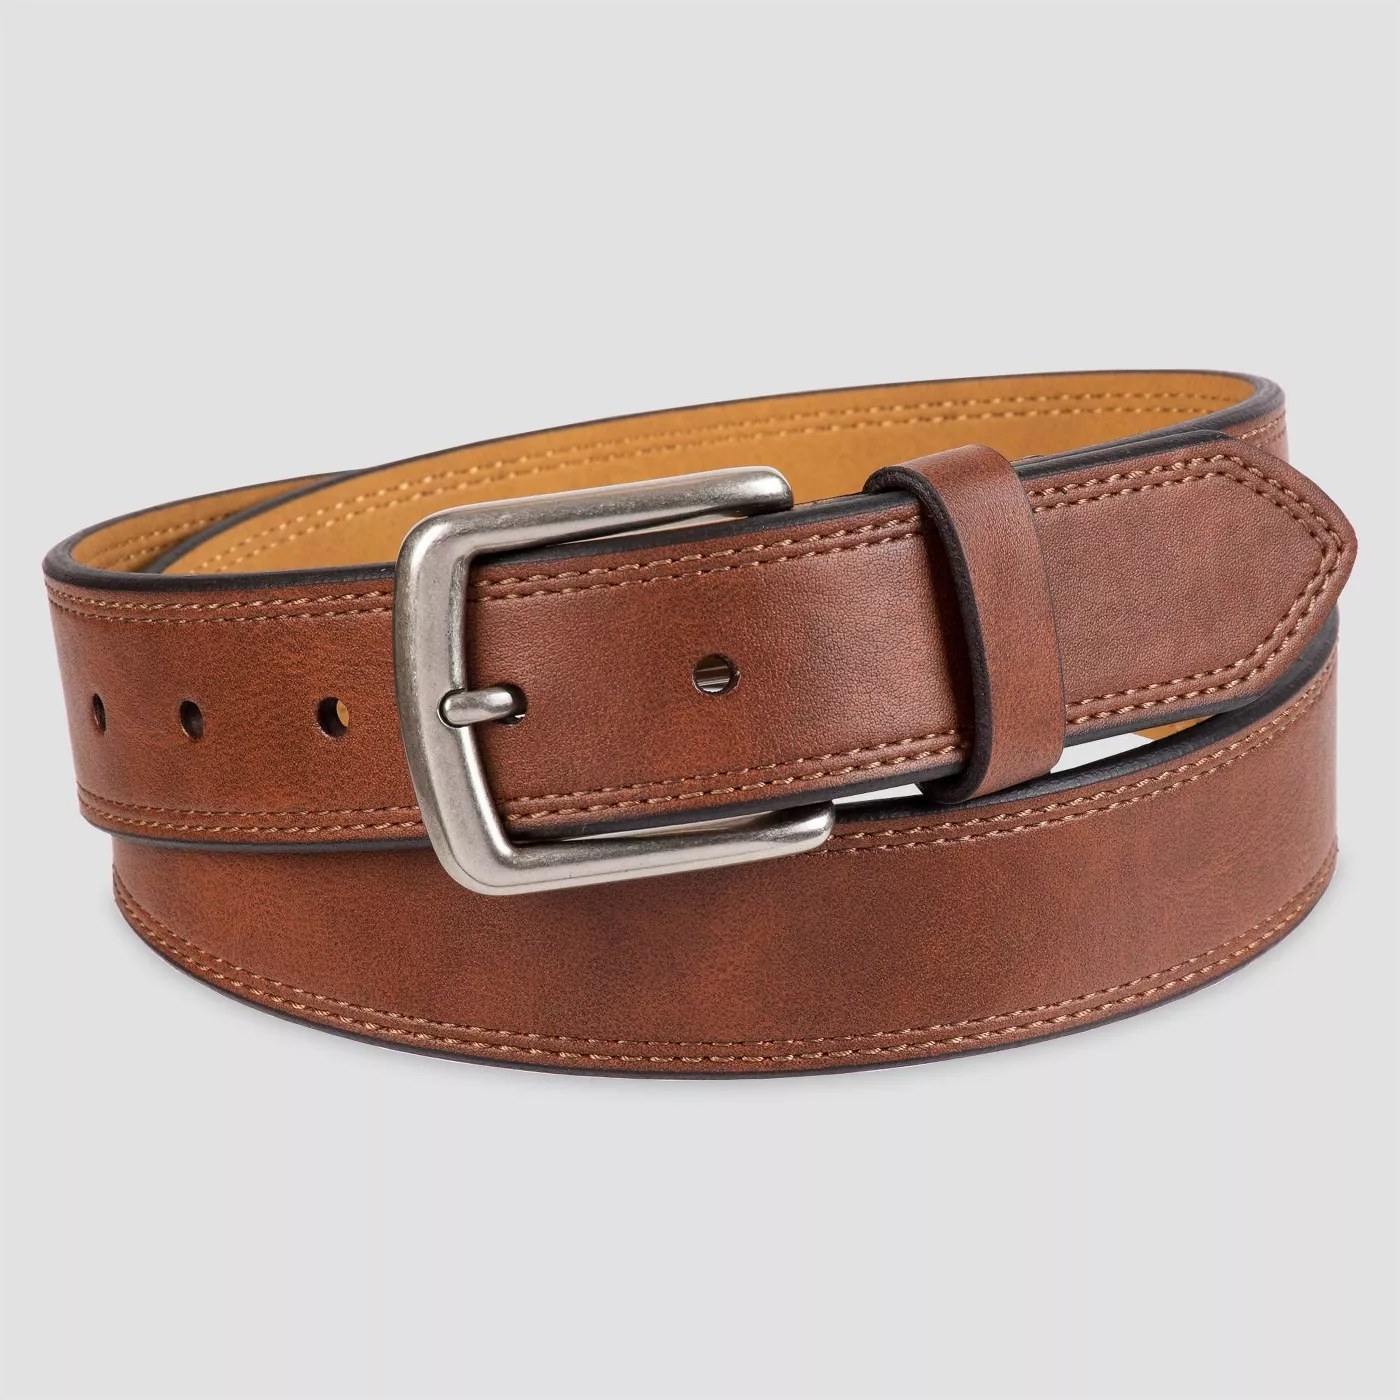 The marbled, double-stitched belt